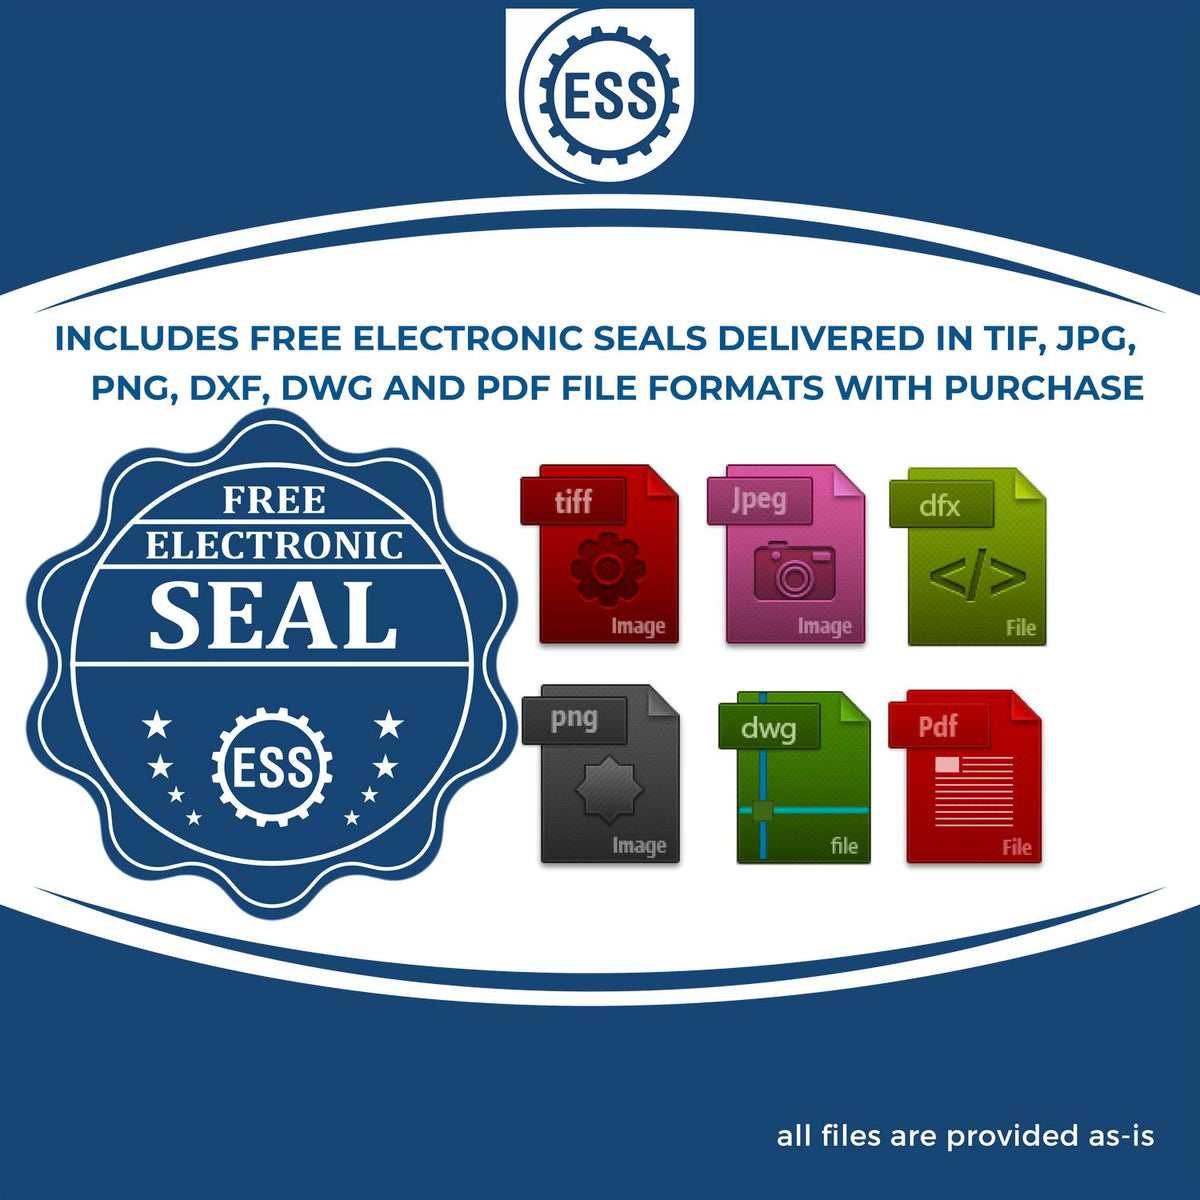 An infographic for the free electronic seal for the Hybrid Hawaii Land Surveyor Seal illustrating the different file type icons such as DXF, DWG, TIF, JPG and PNG.